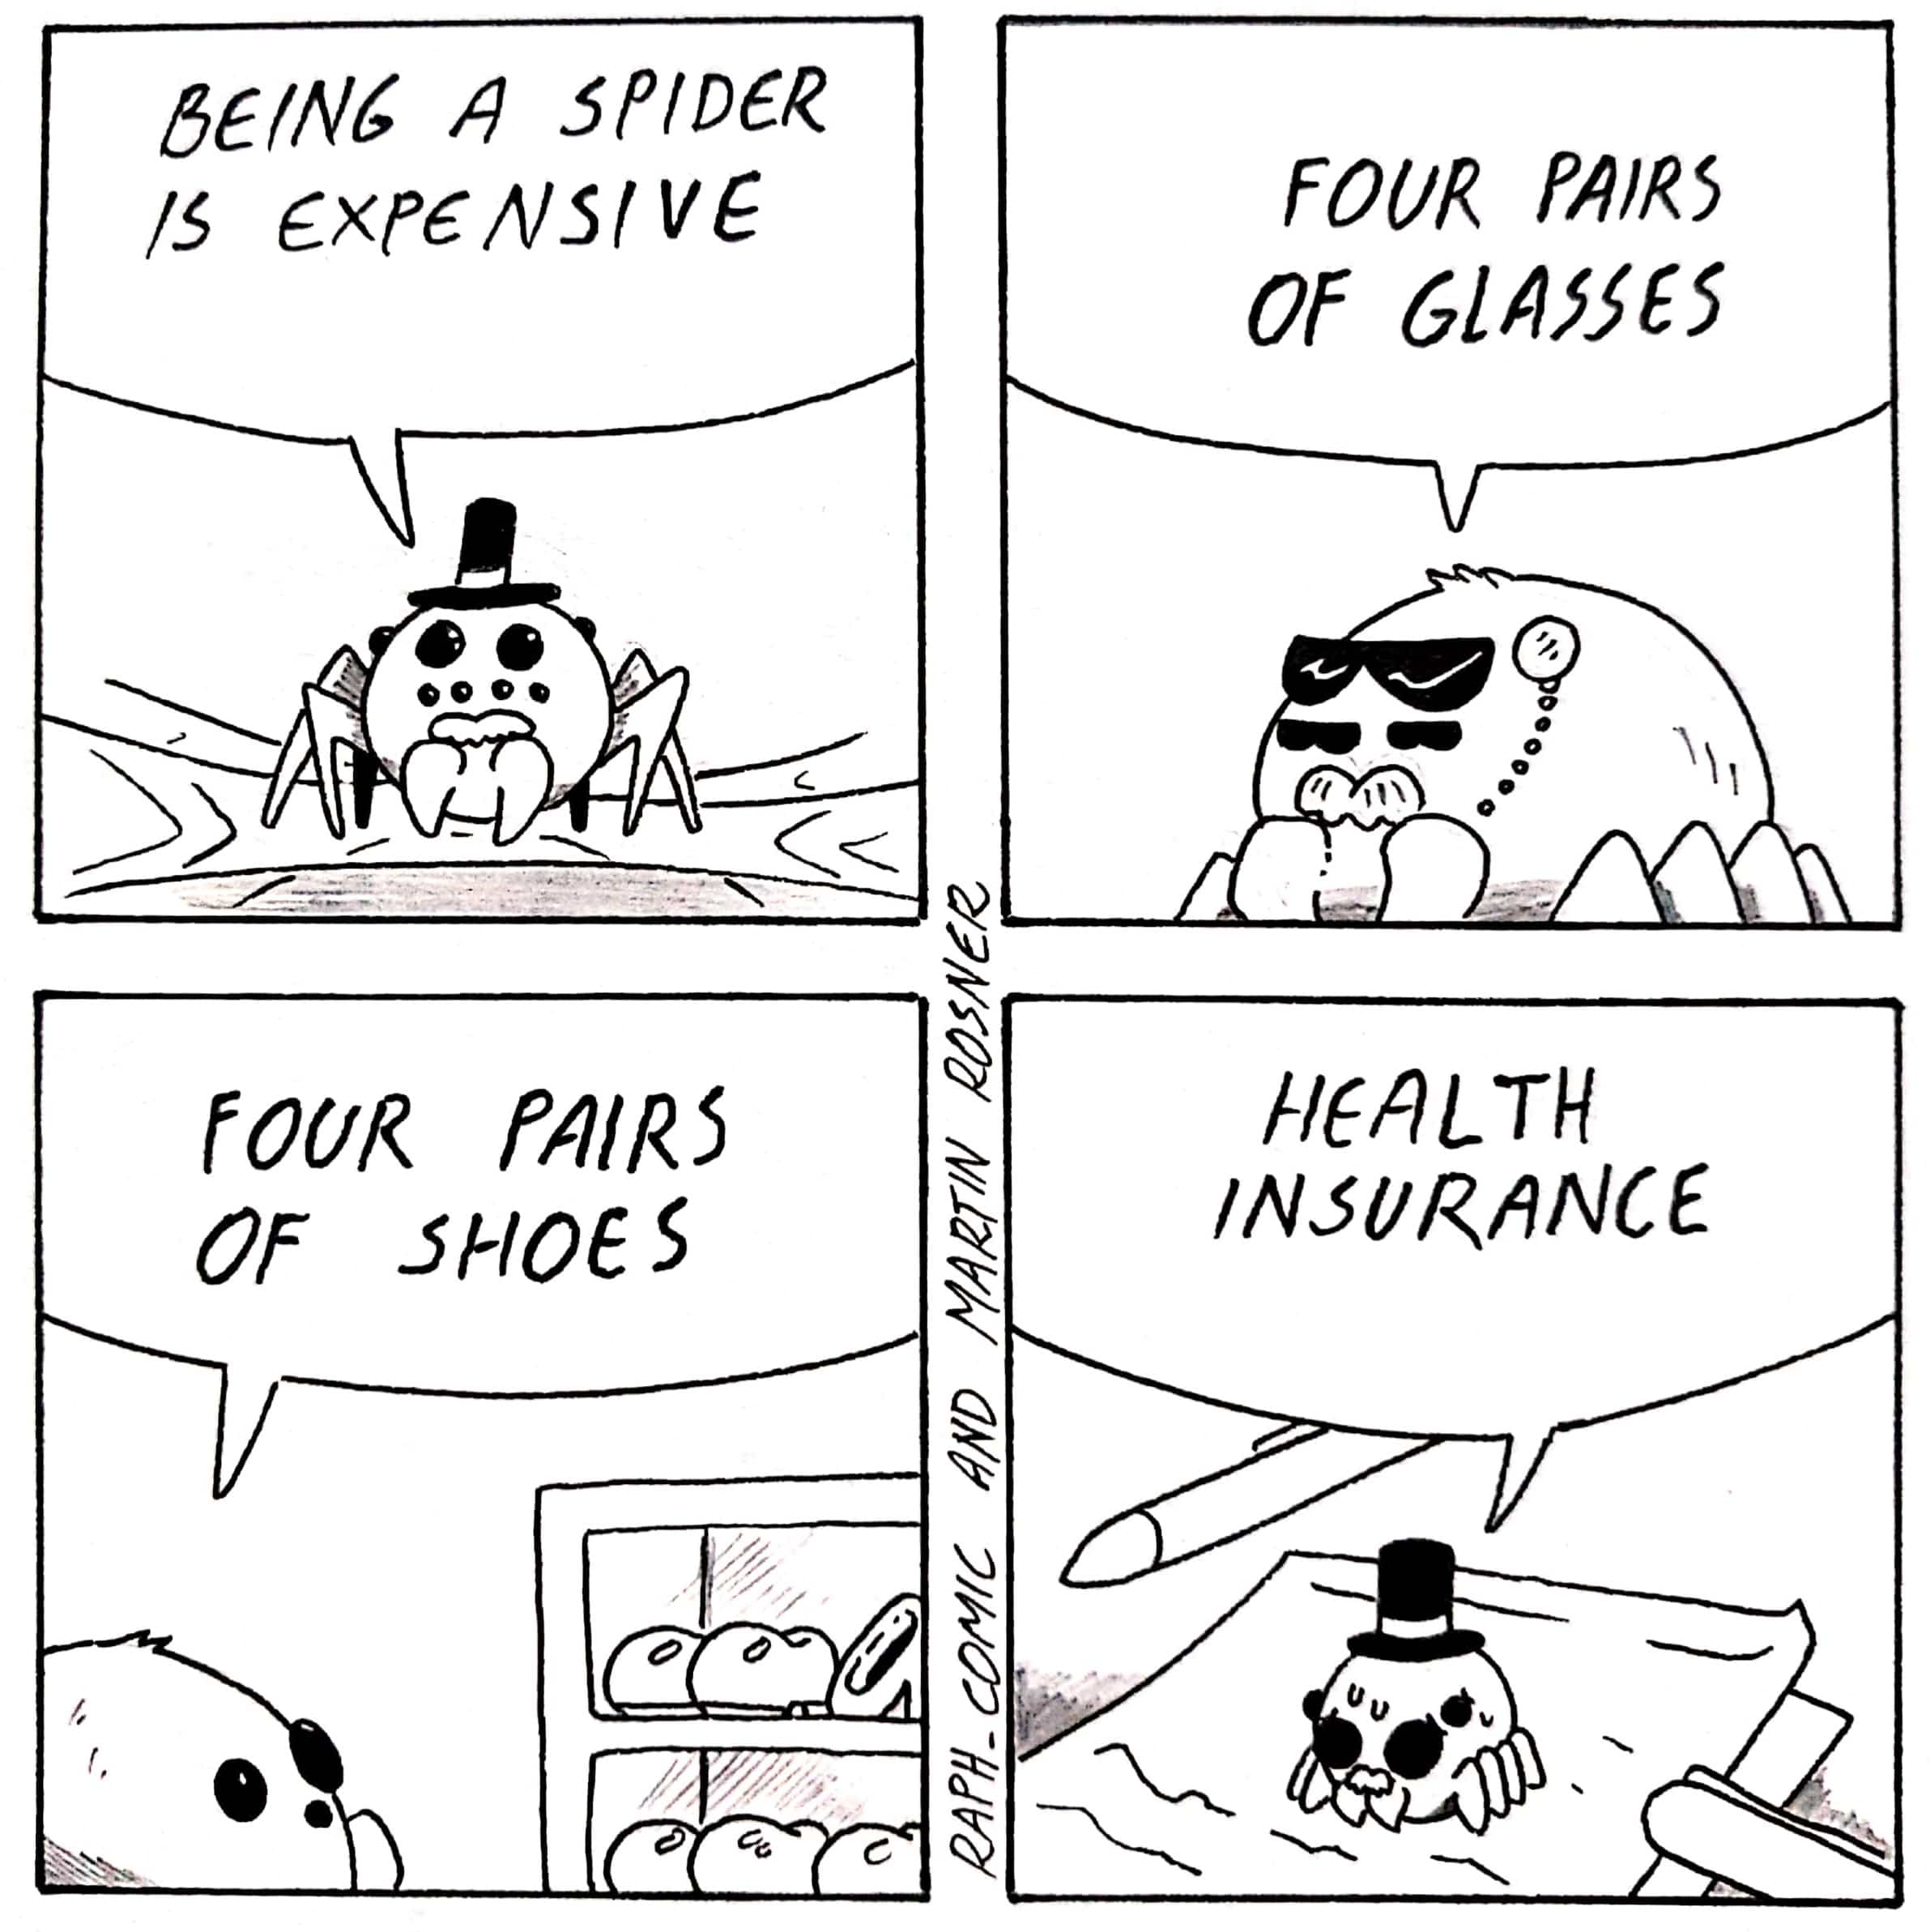 Being a spider is expensive, America Comics Being a spider is expensive, America text: be(N6 A SPIDER /S EXP 6 NS/ V C FOUR PA/R5 OF SHOES c FOUR /N$VRnNCE 